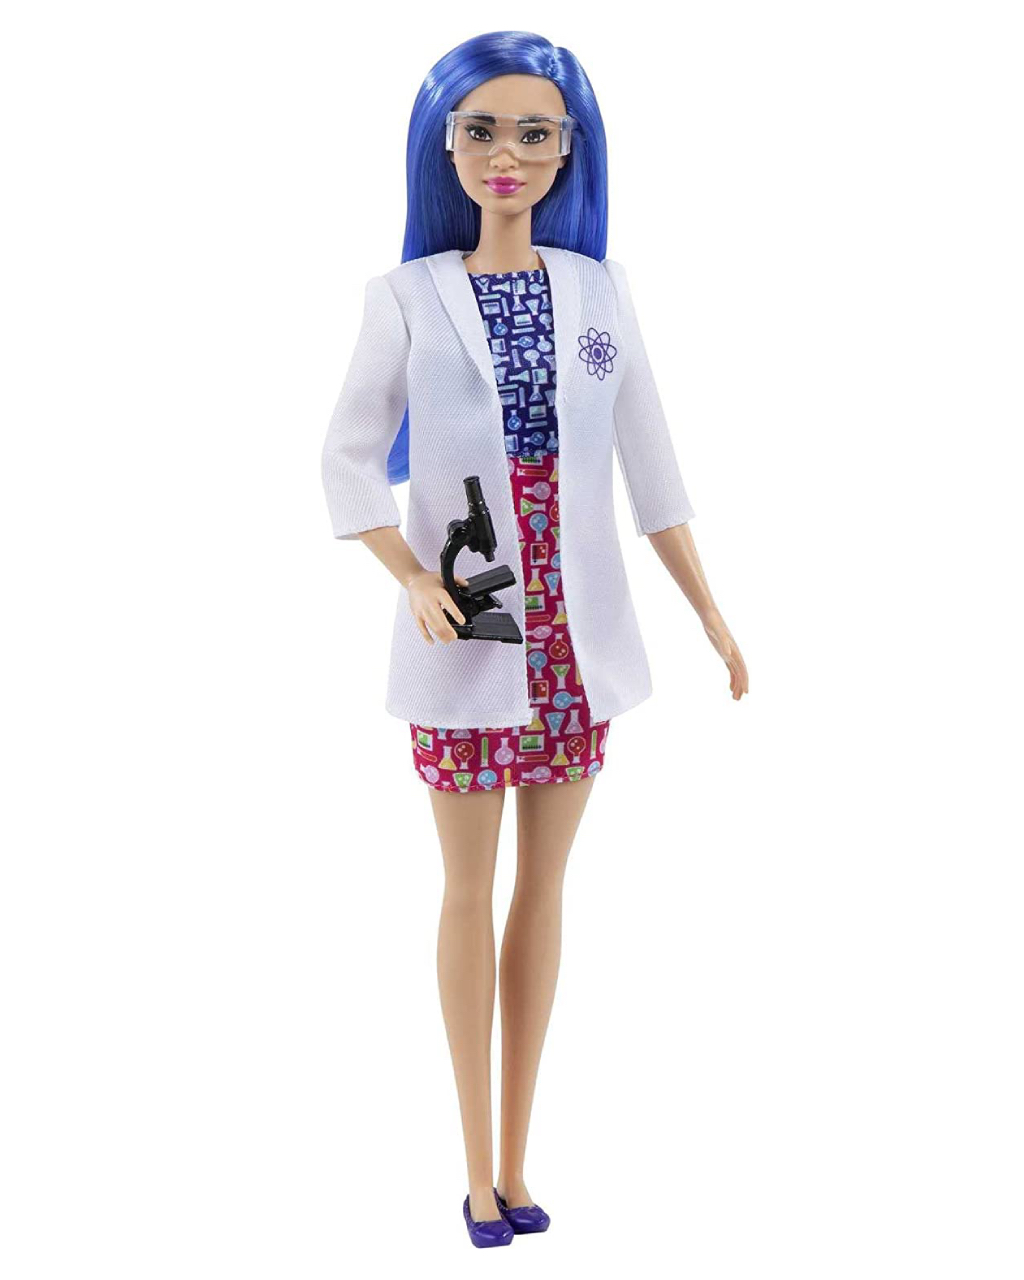 Barbie You Can Be...scientist 2021